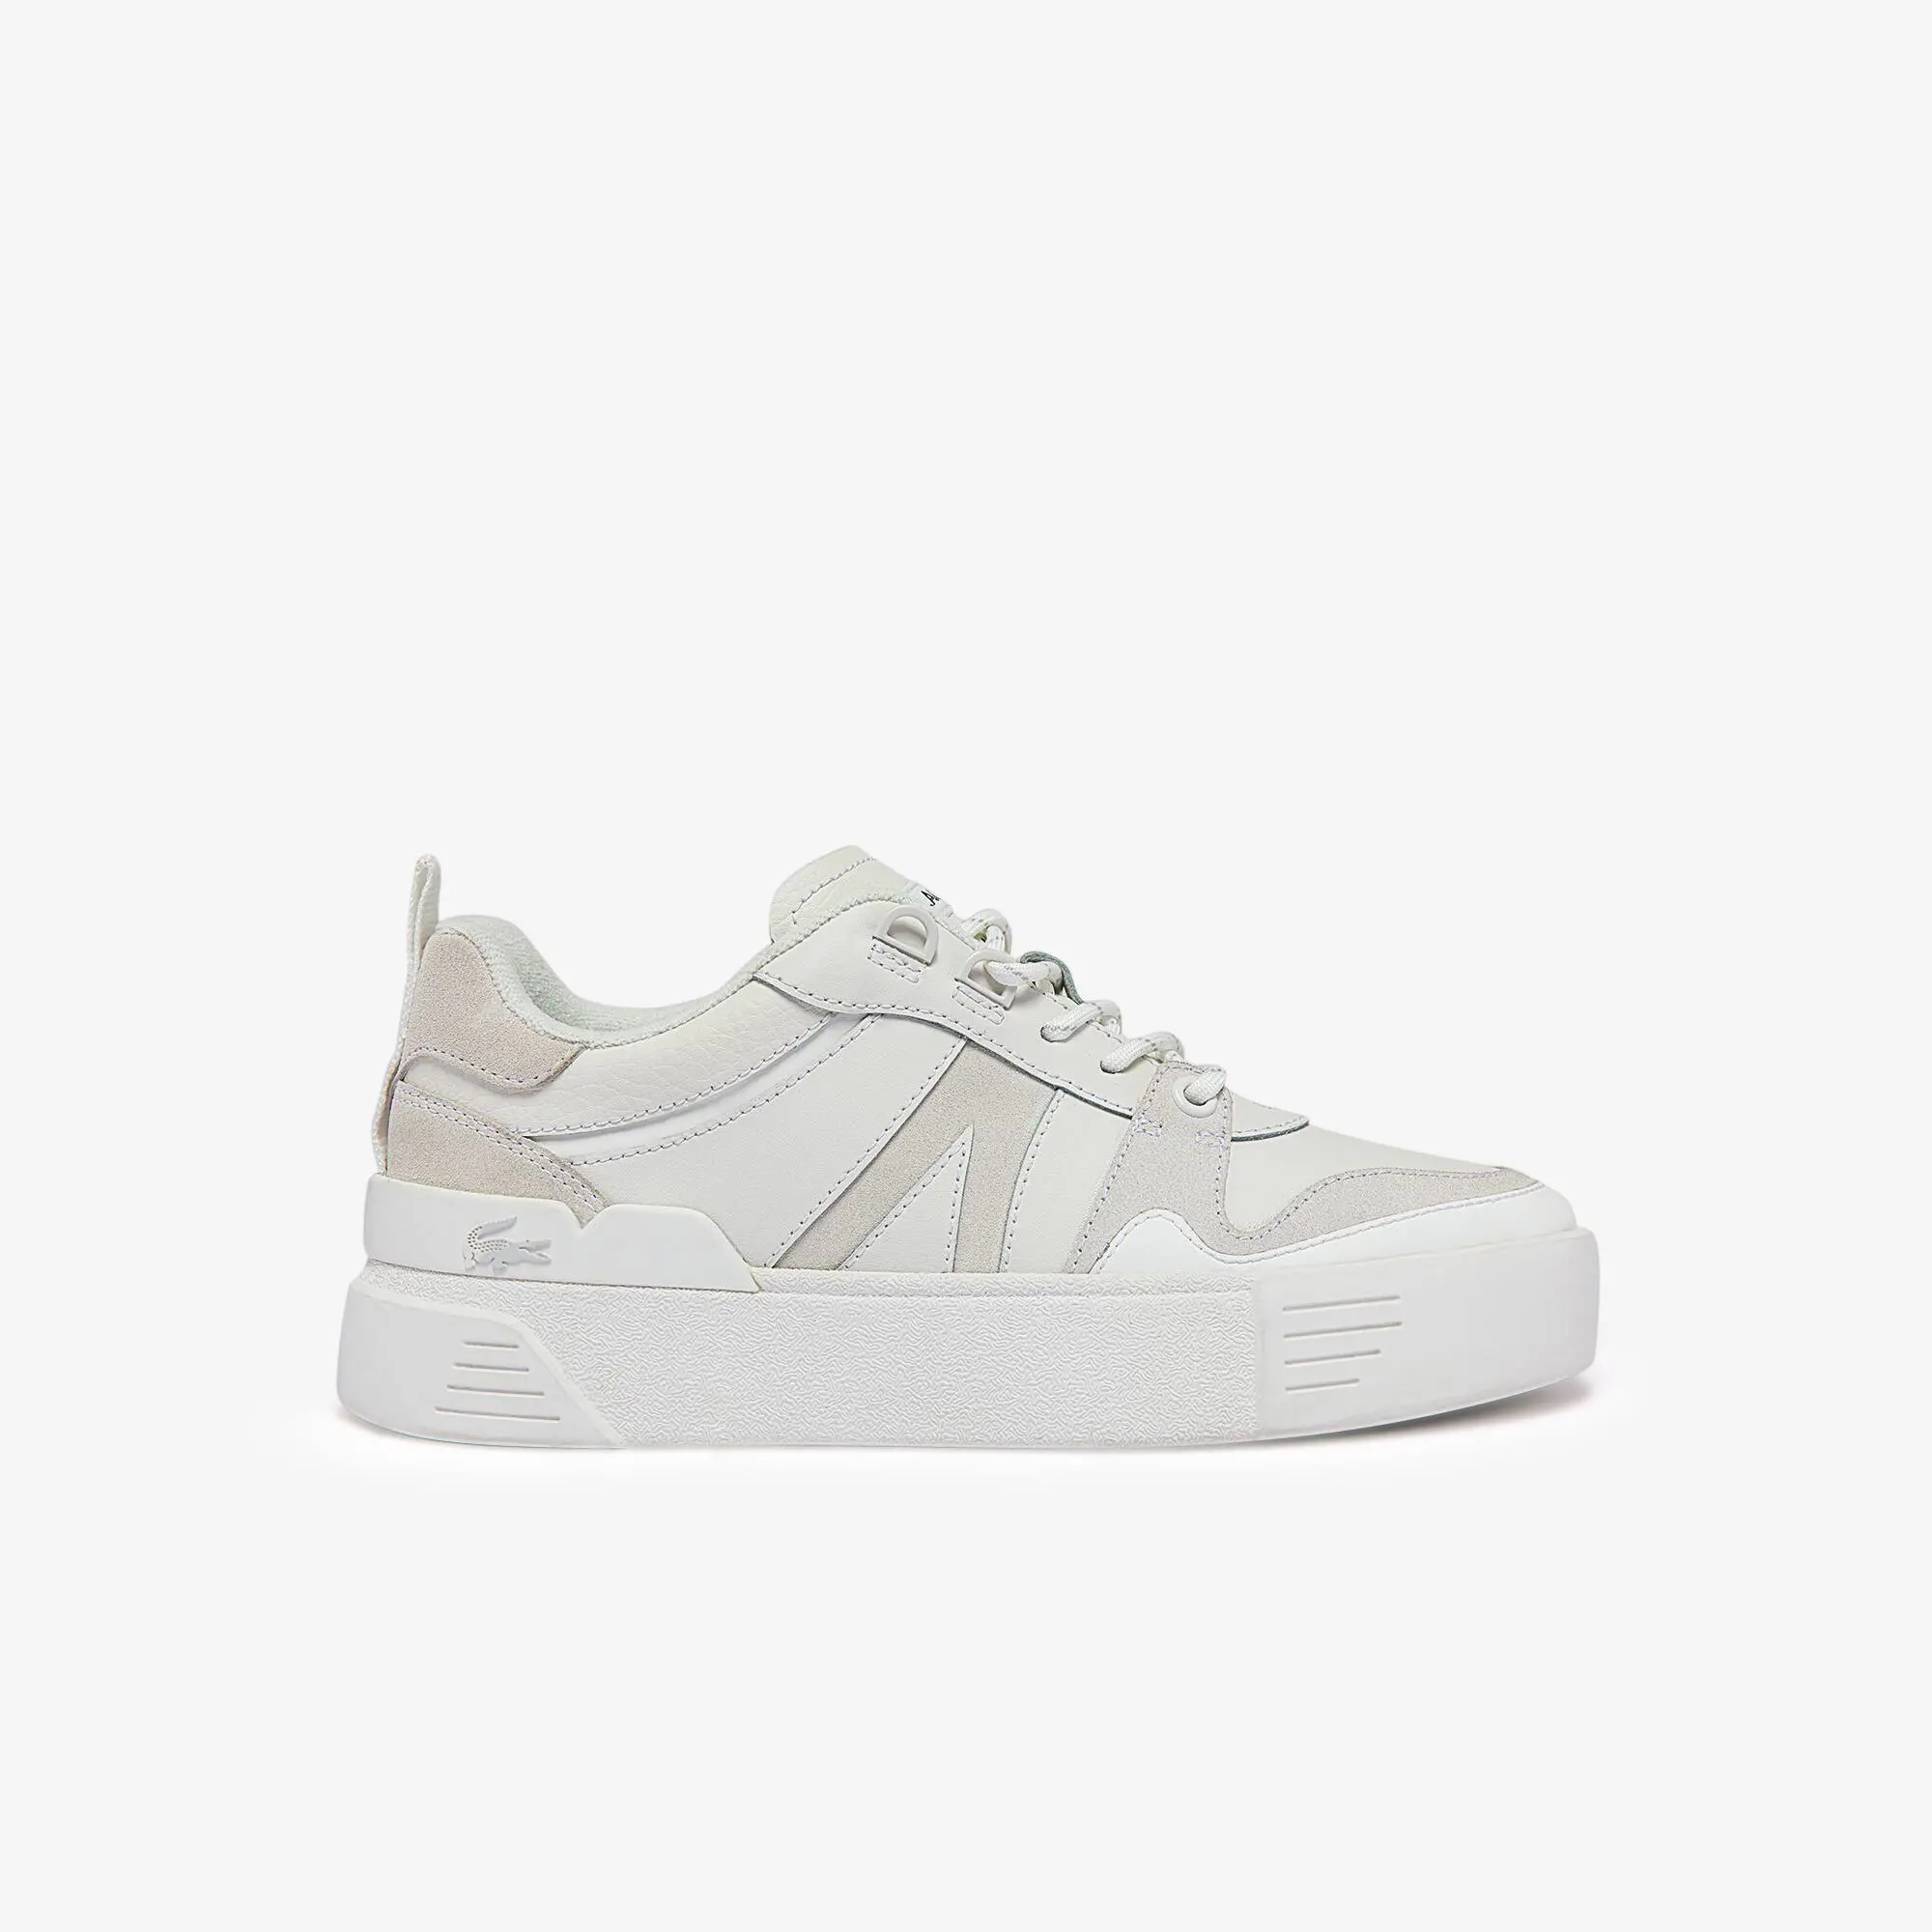 Lacoste Women's L002 Leather Trainers. 1